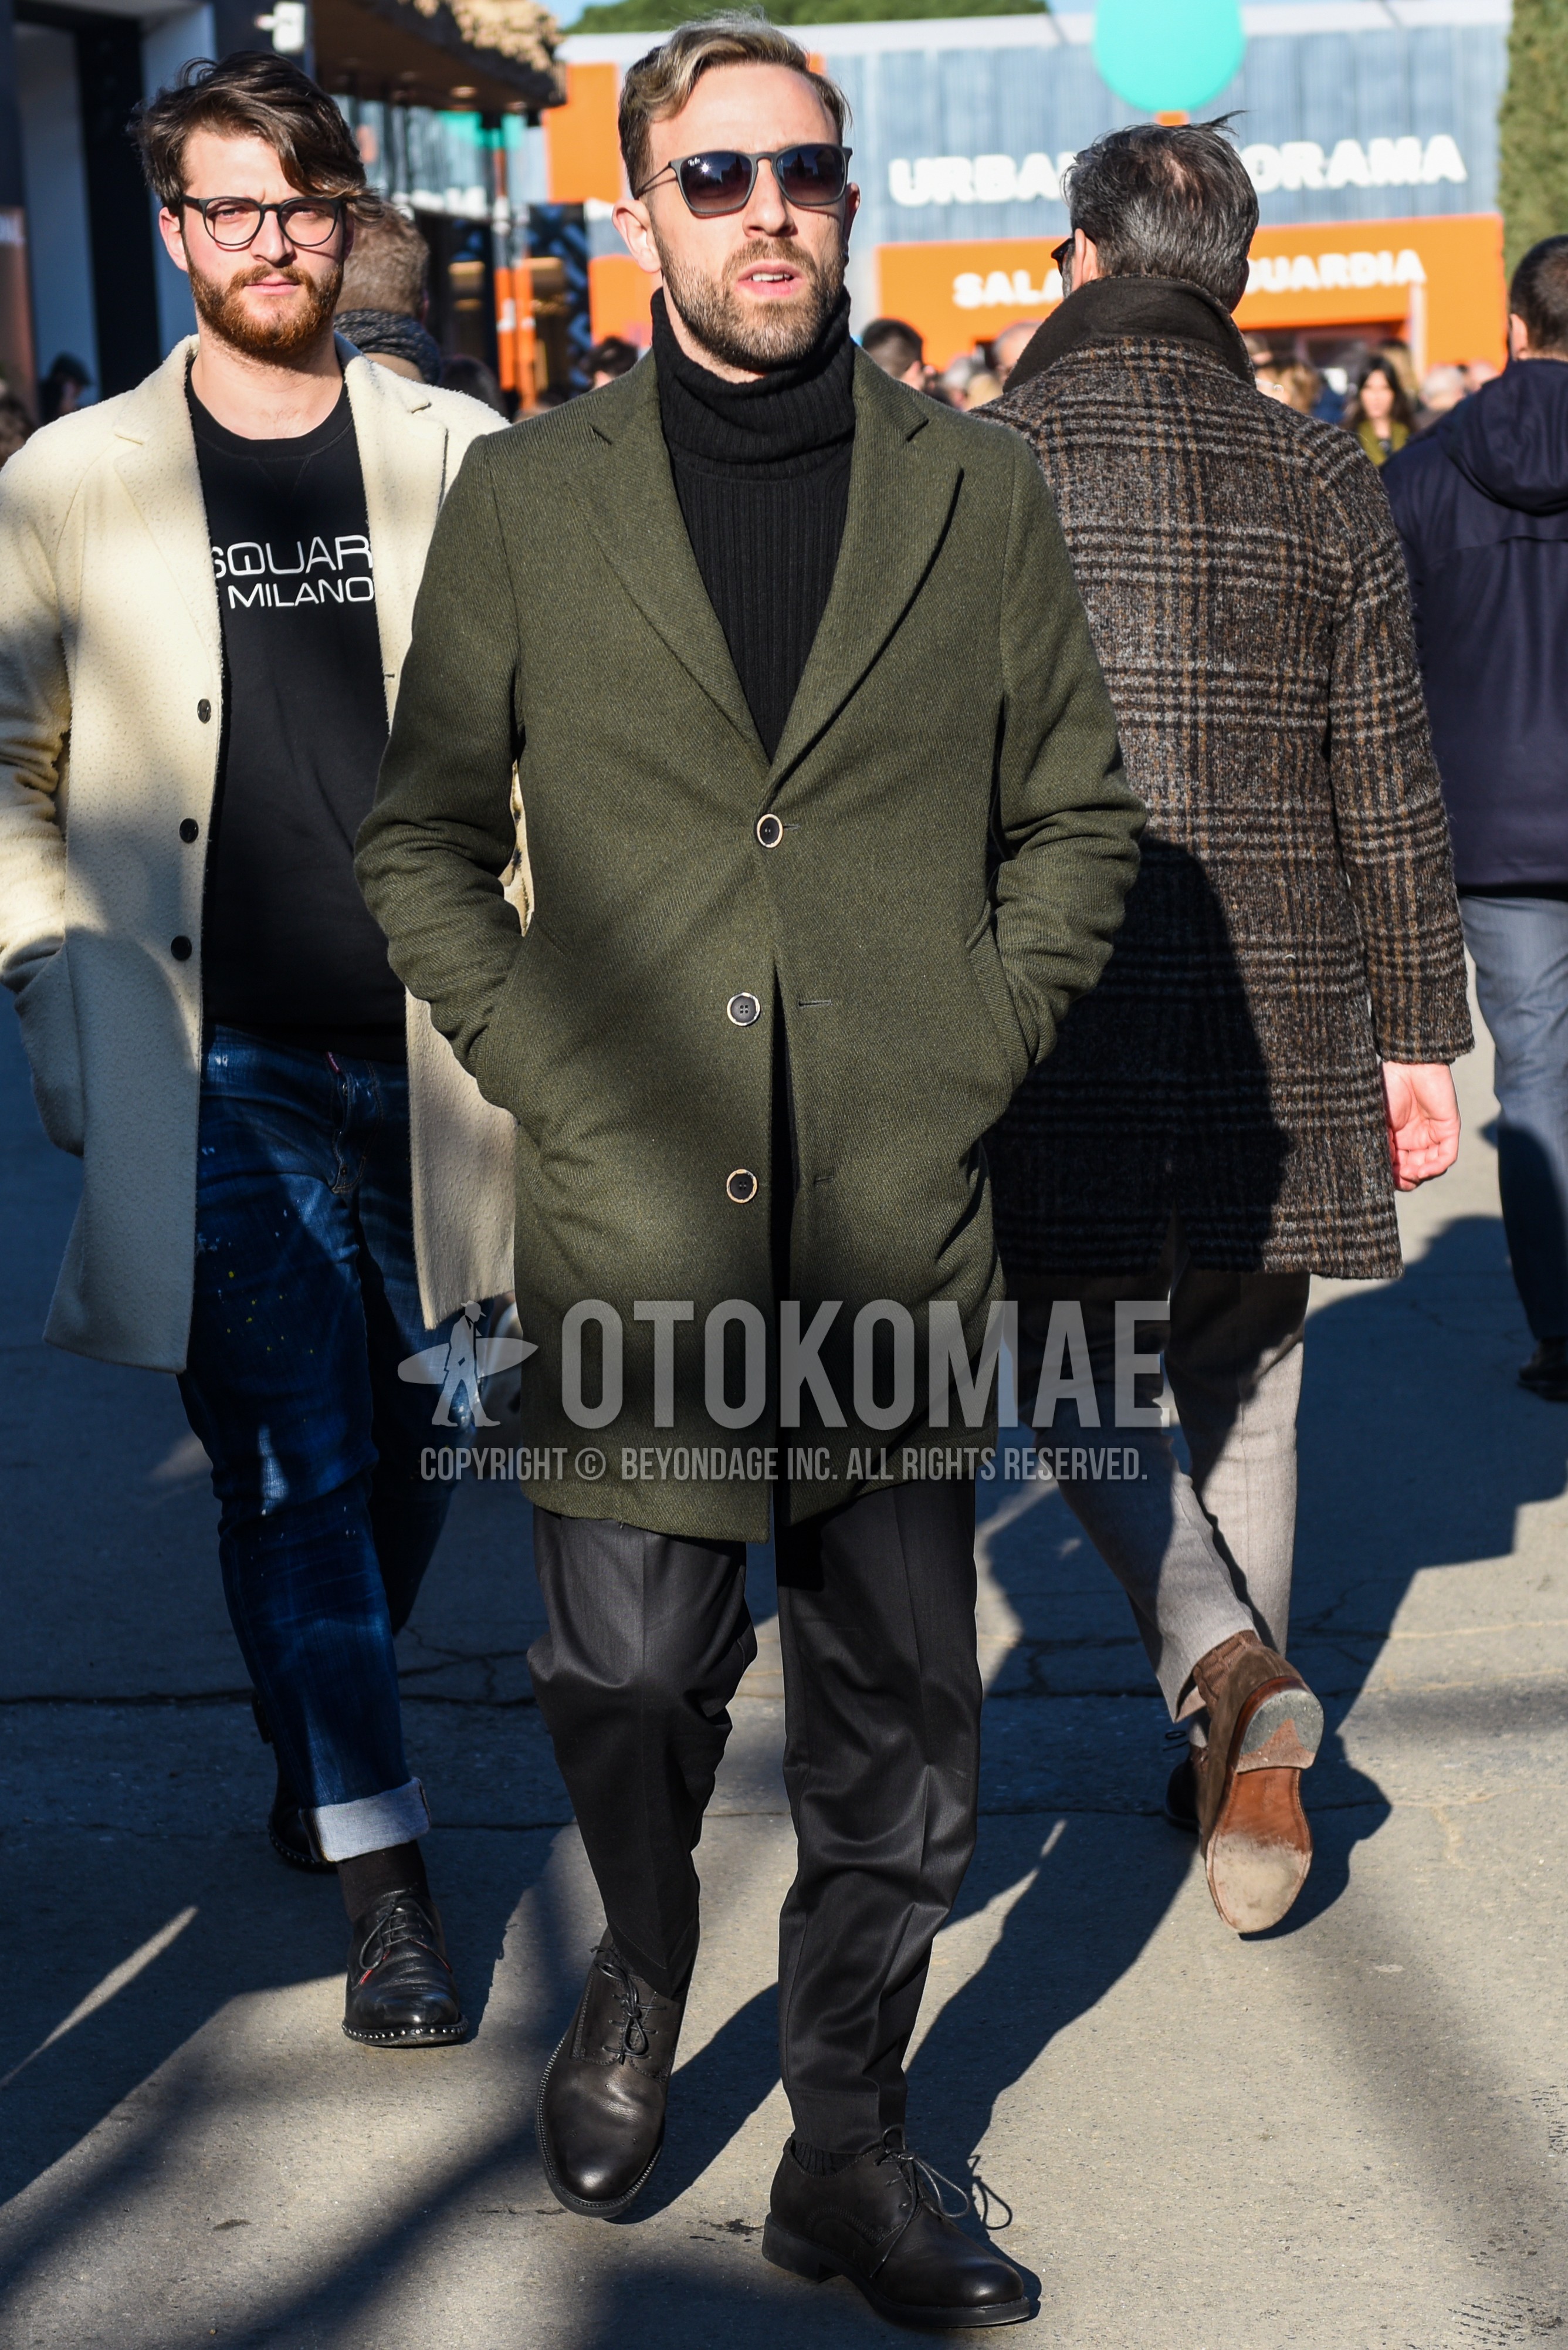 Men's autumn winter outfit with gray plain sunglasses, olive green plain chester coat, black plain turtleneck knit, gray plain slacks, black plain toe leather shoes.